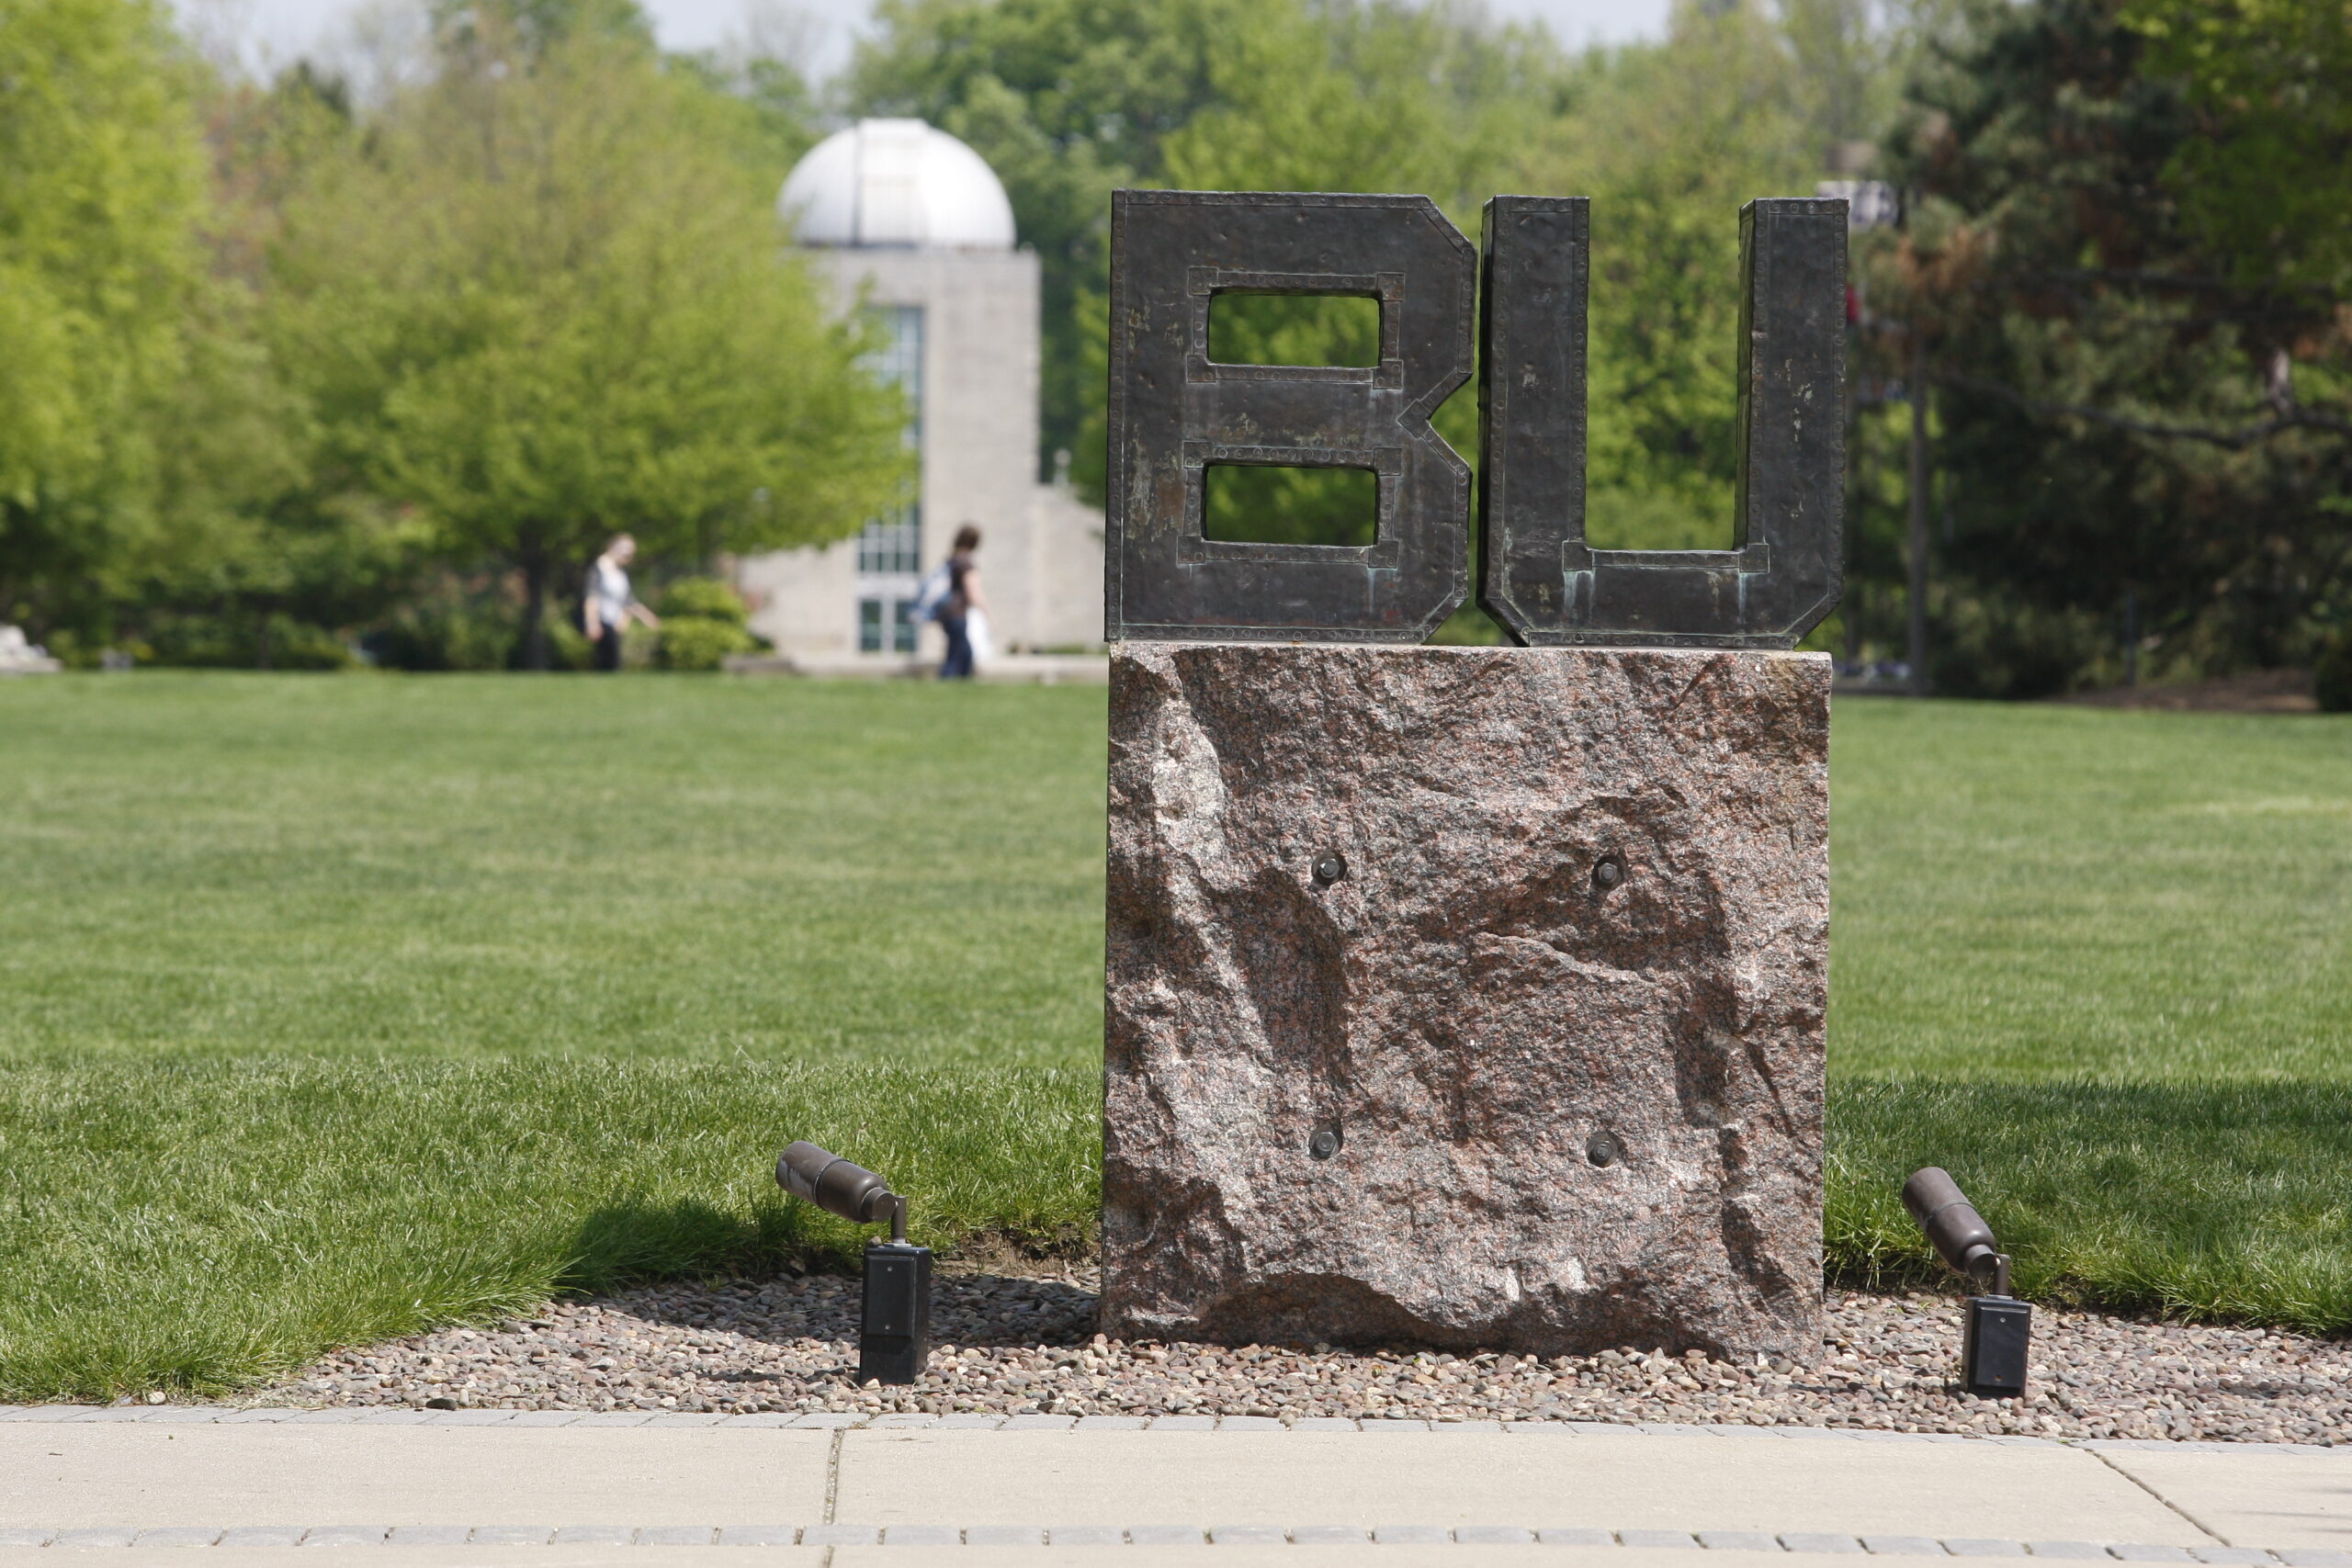 BU sign with Holcomb Observatory in the background